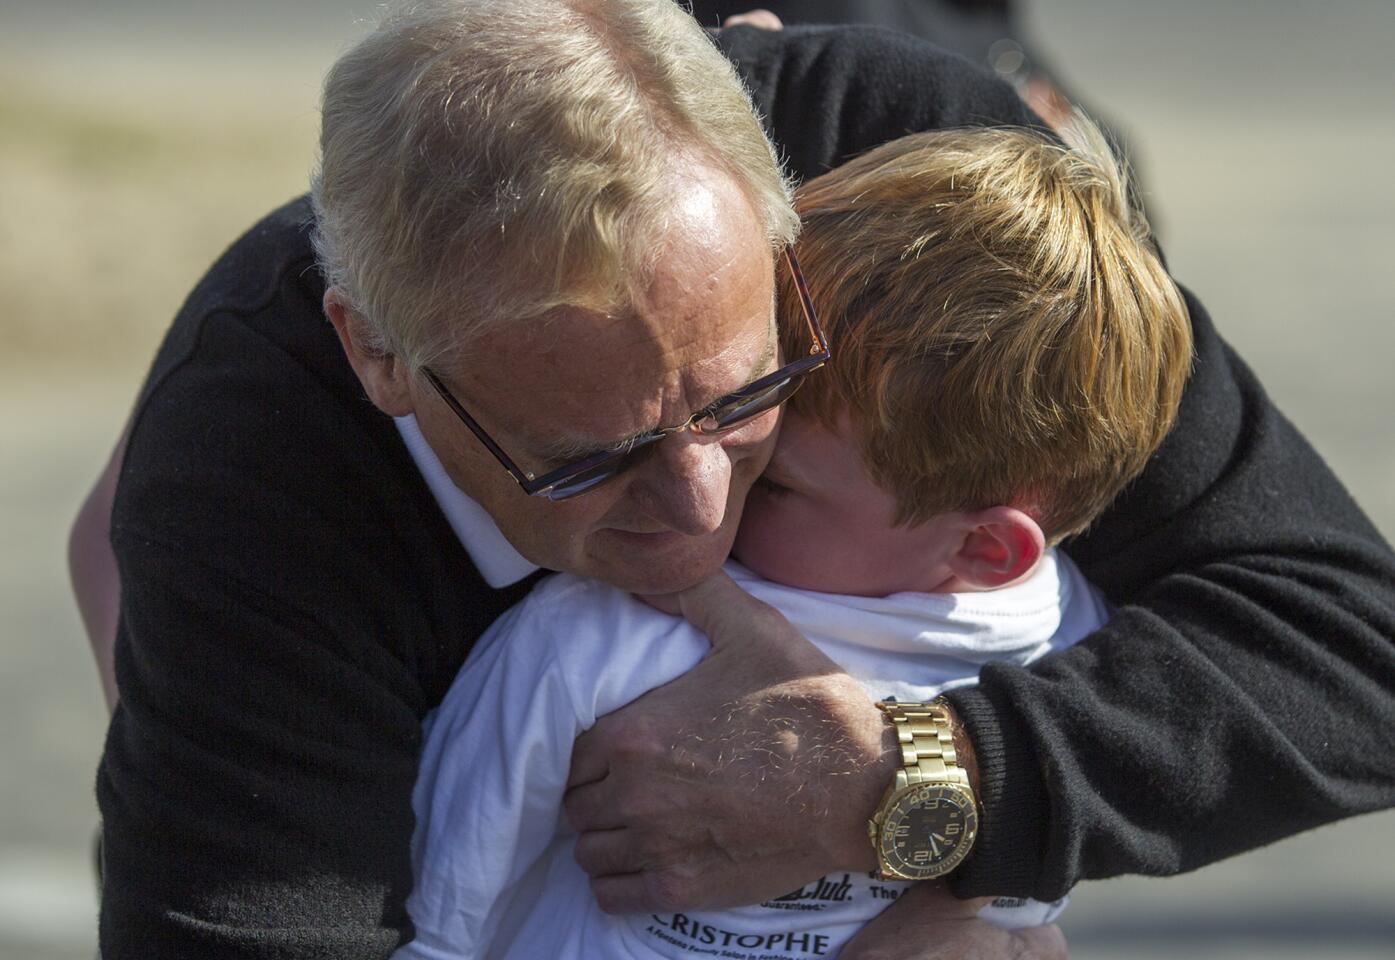 Anders Manson hugs his grandson Liam McCarthy, 7, after running in the Newport Elementary School's annual jog-a-thon on Wednesday.